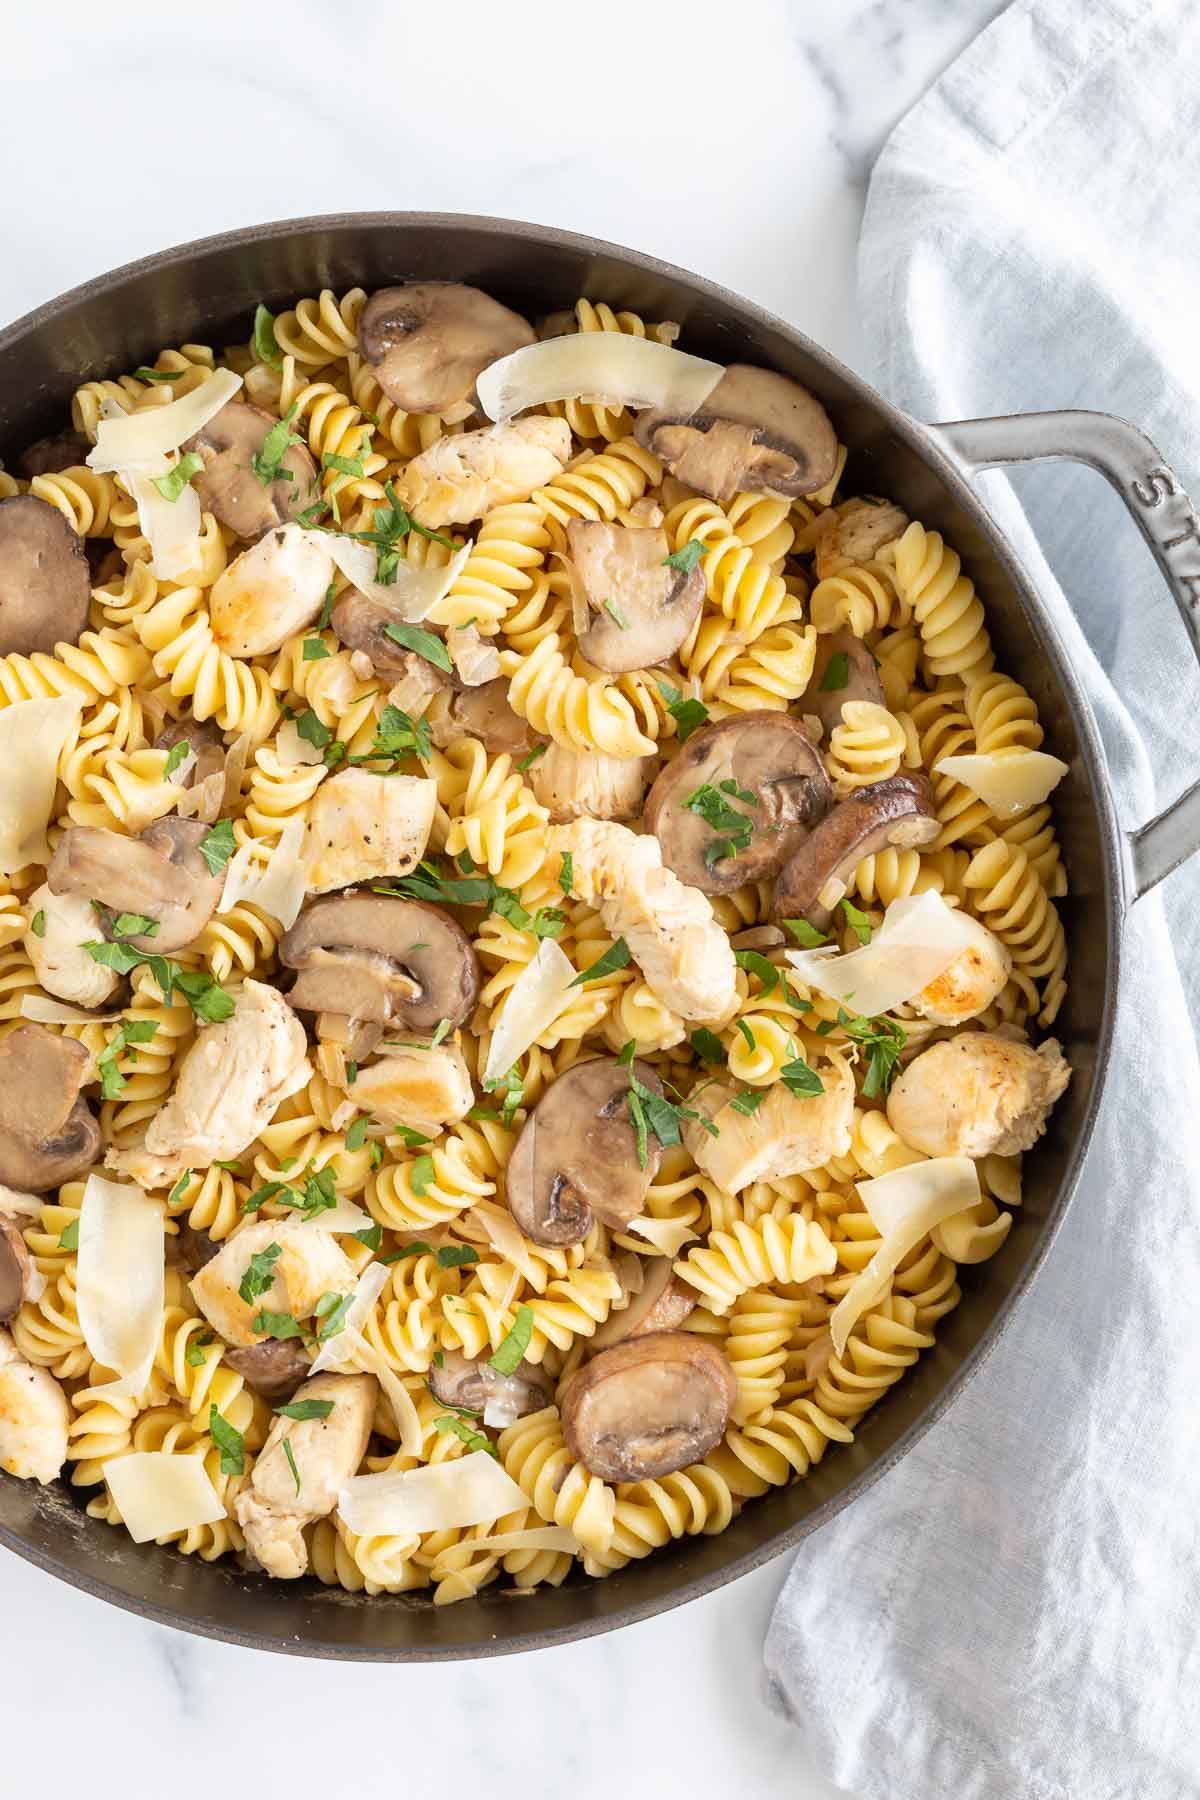 A skillet containing chicken mushroom pasta mixed with fusilli, garnished with herbs on a marble surface.